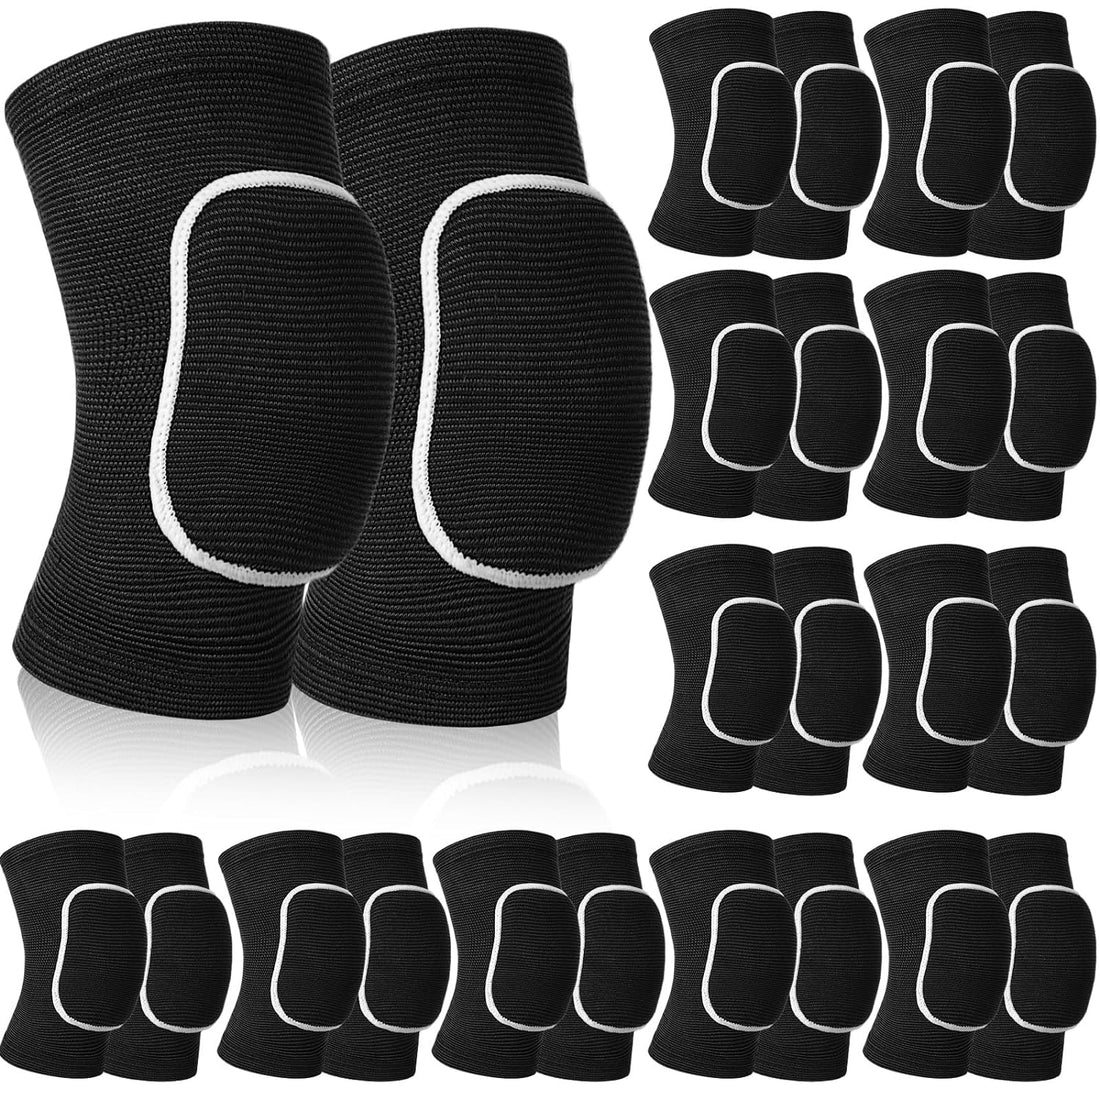 Lenwen 12 Pairs Volleyball Knee Pads for Dancers, Breathable Knee Pads for Men Women Kids, Black Knee Braces for Volleyball Football Soccer Dance Yoga Wrestling Running Cycling (Black, White,Medium)